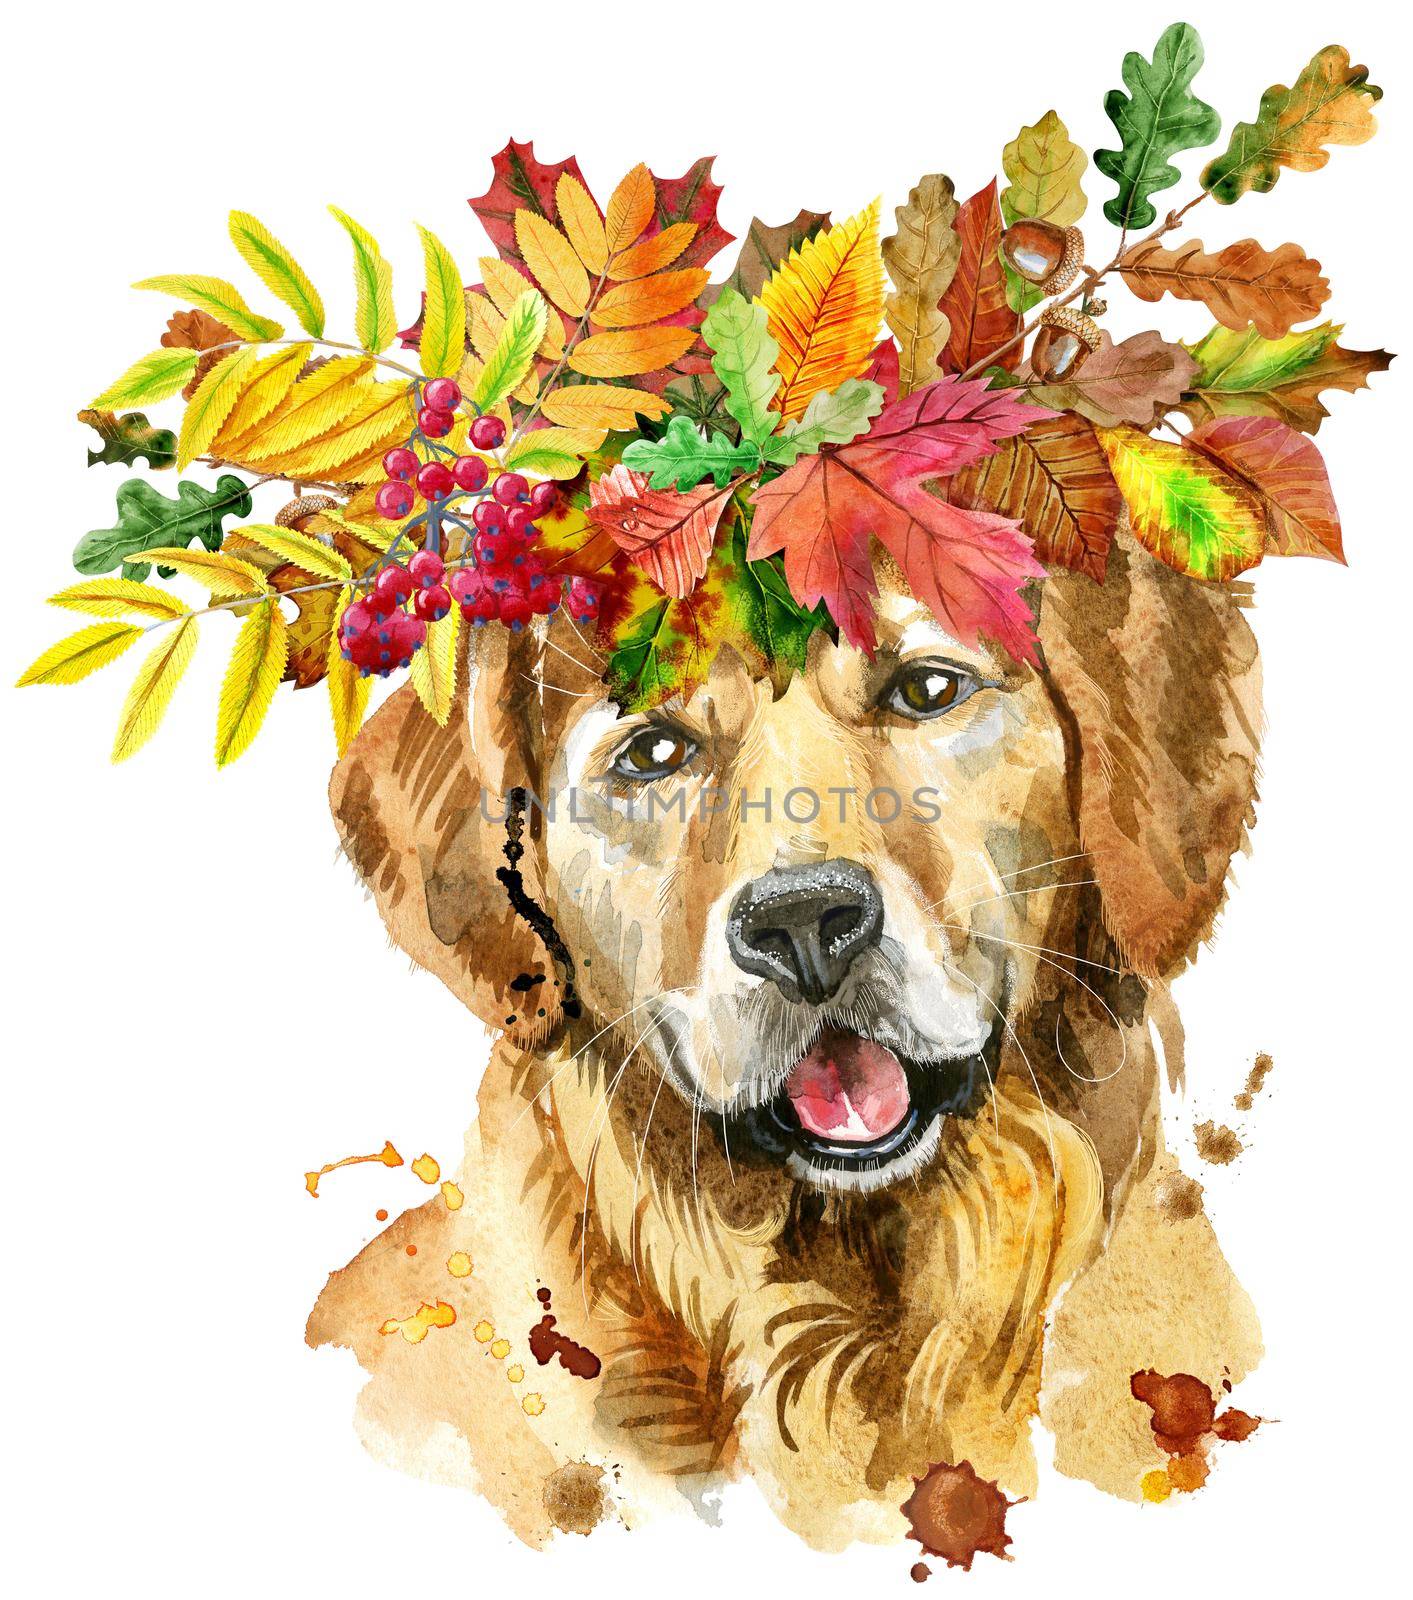 Watercolor portrait of golden retriever with wreath of leaves by NataOmsk